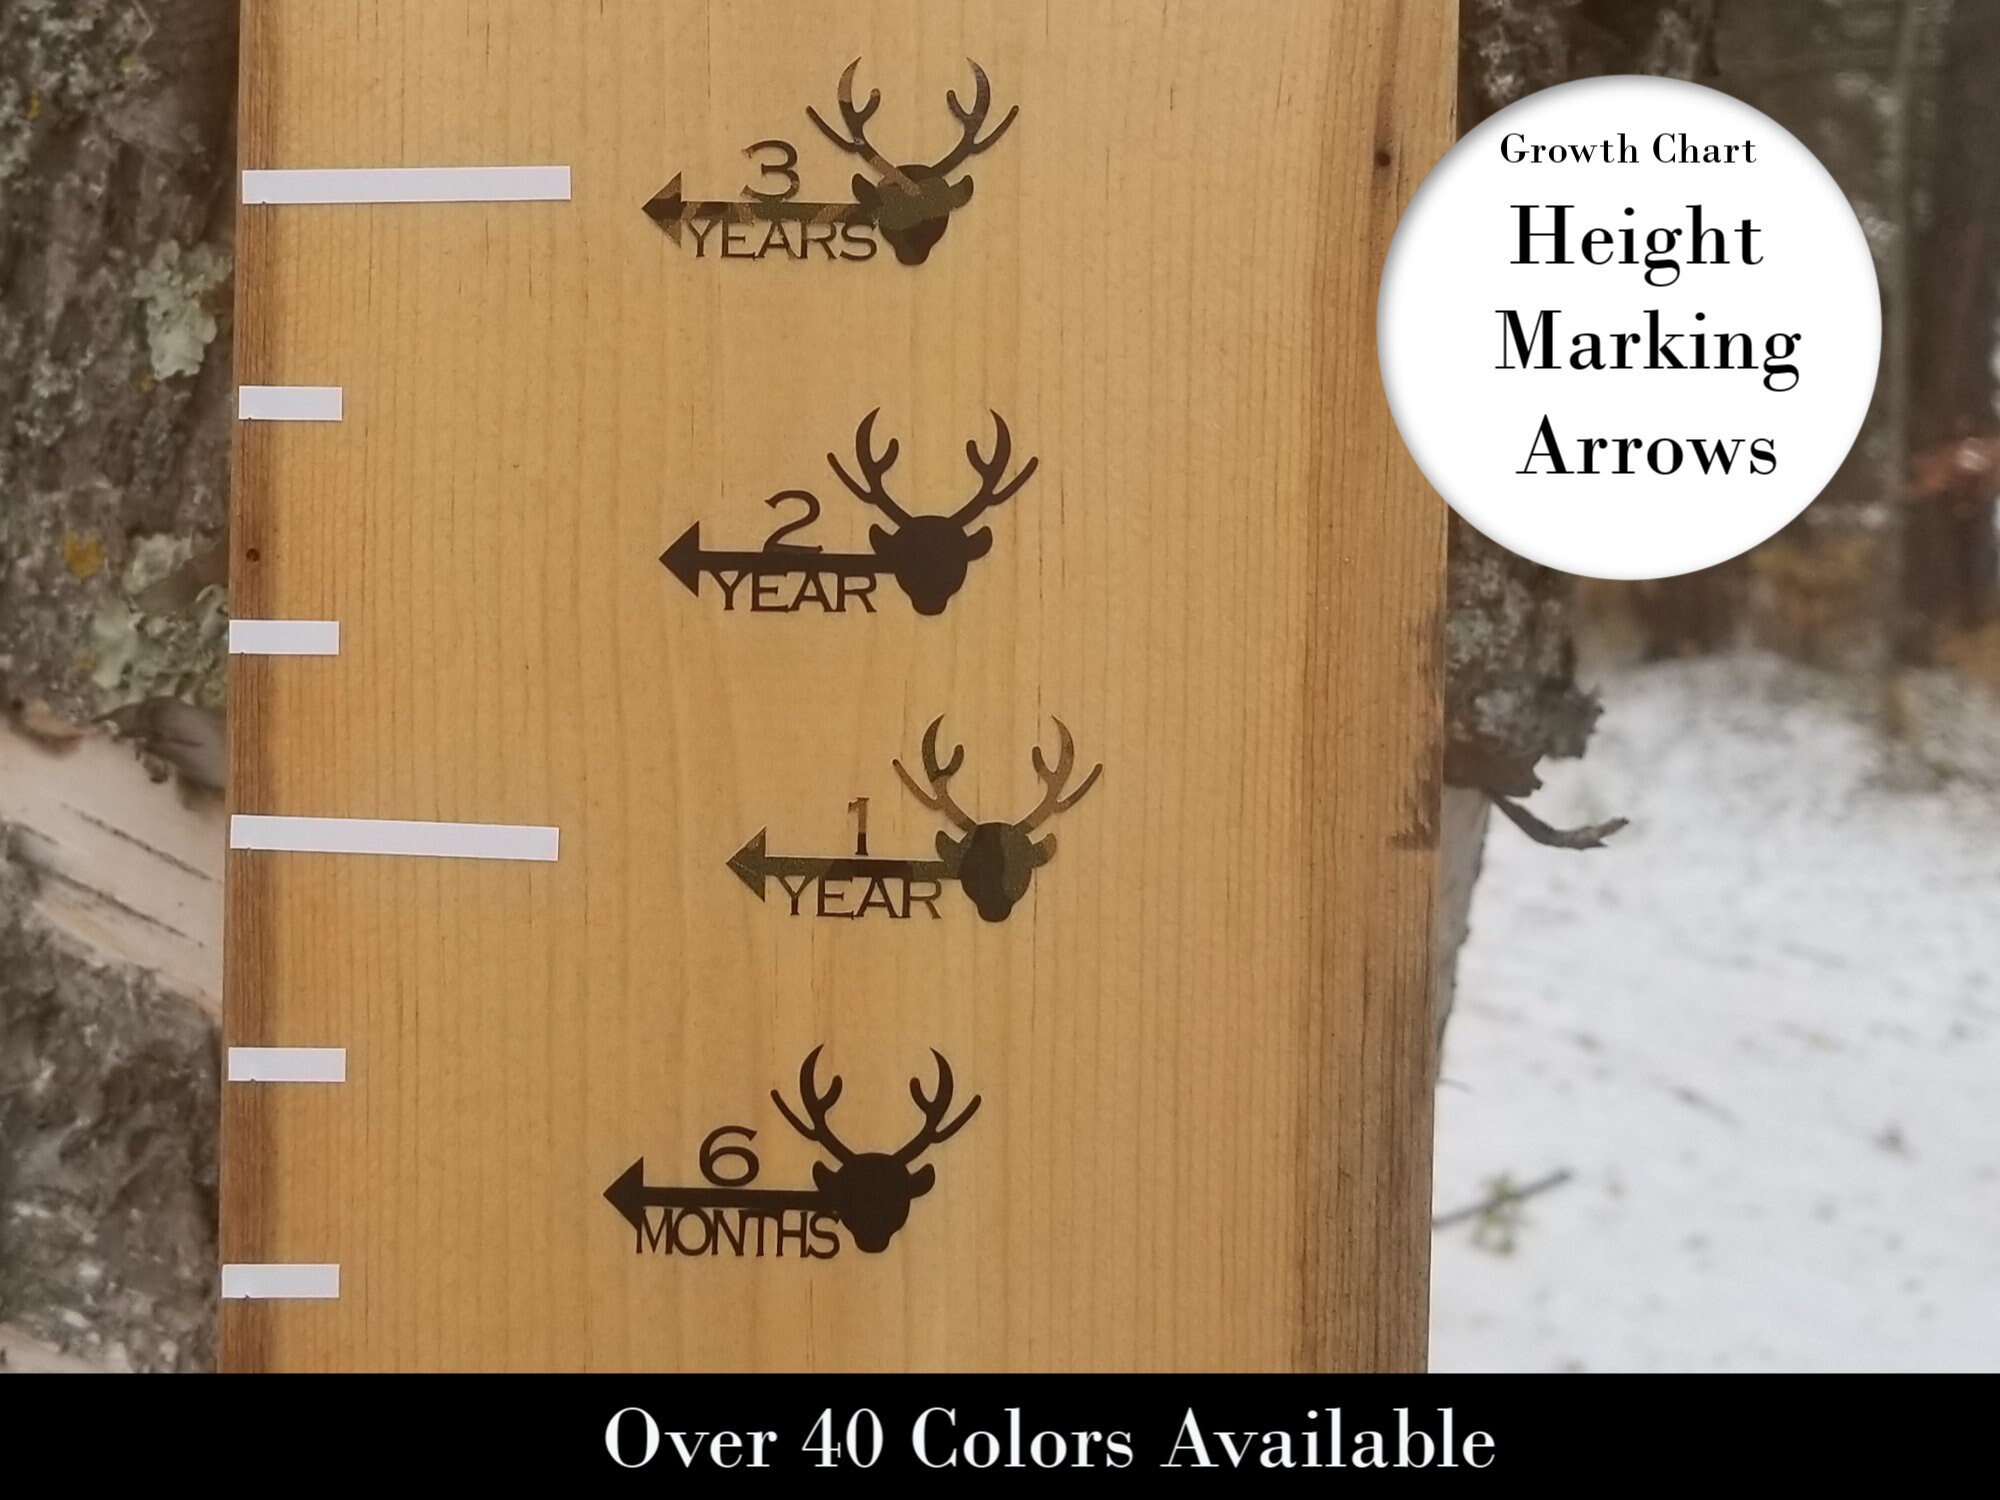 Available Left or Right Pointing Arrow Deer ~ Height Marking Arrows for Growth Charts